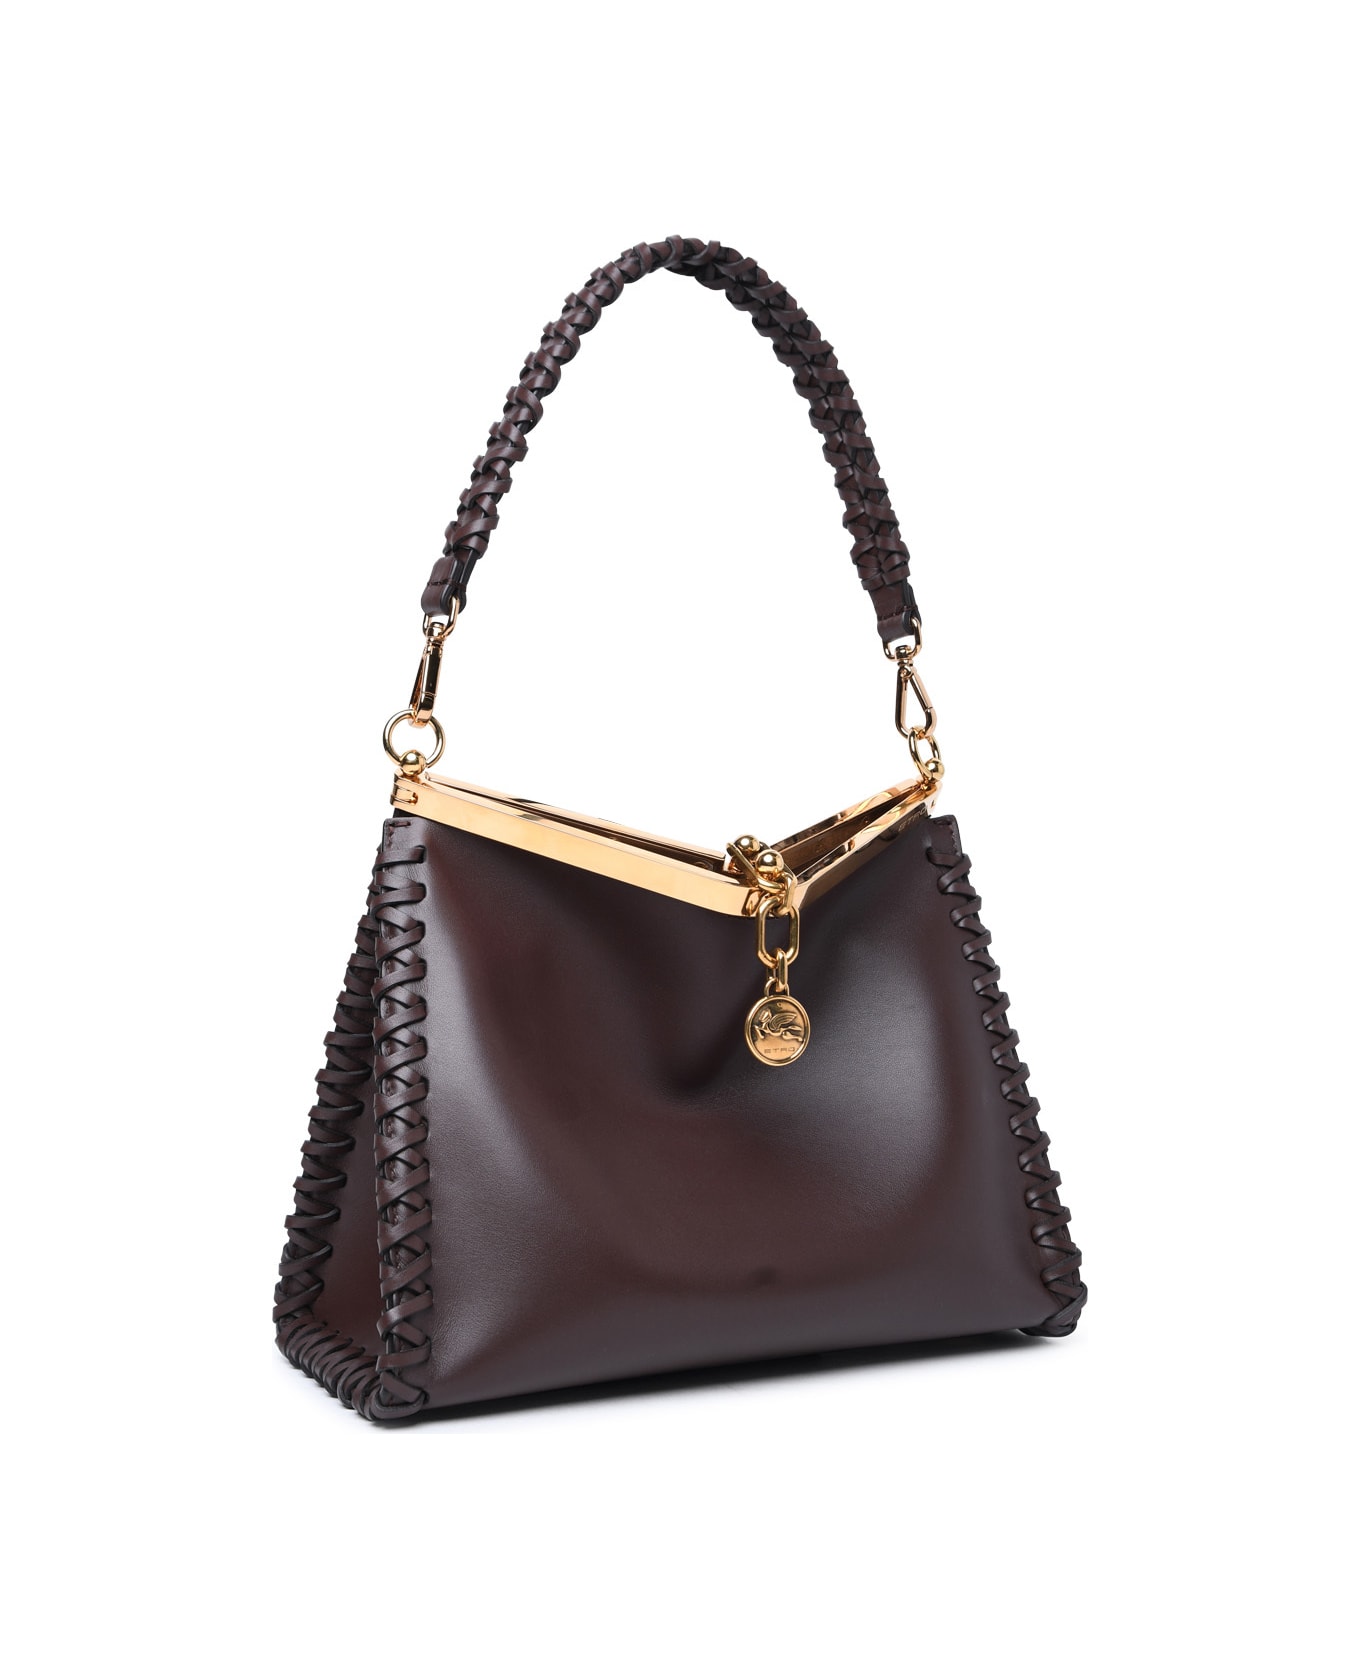 Etro 'vela' Small Brown Leather Bag - Brown